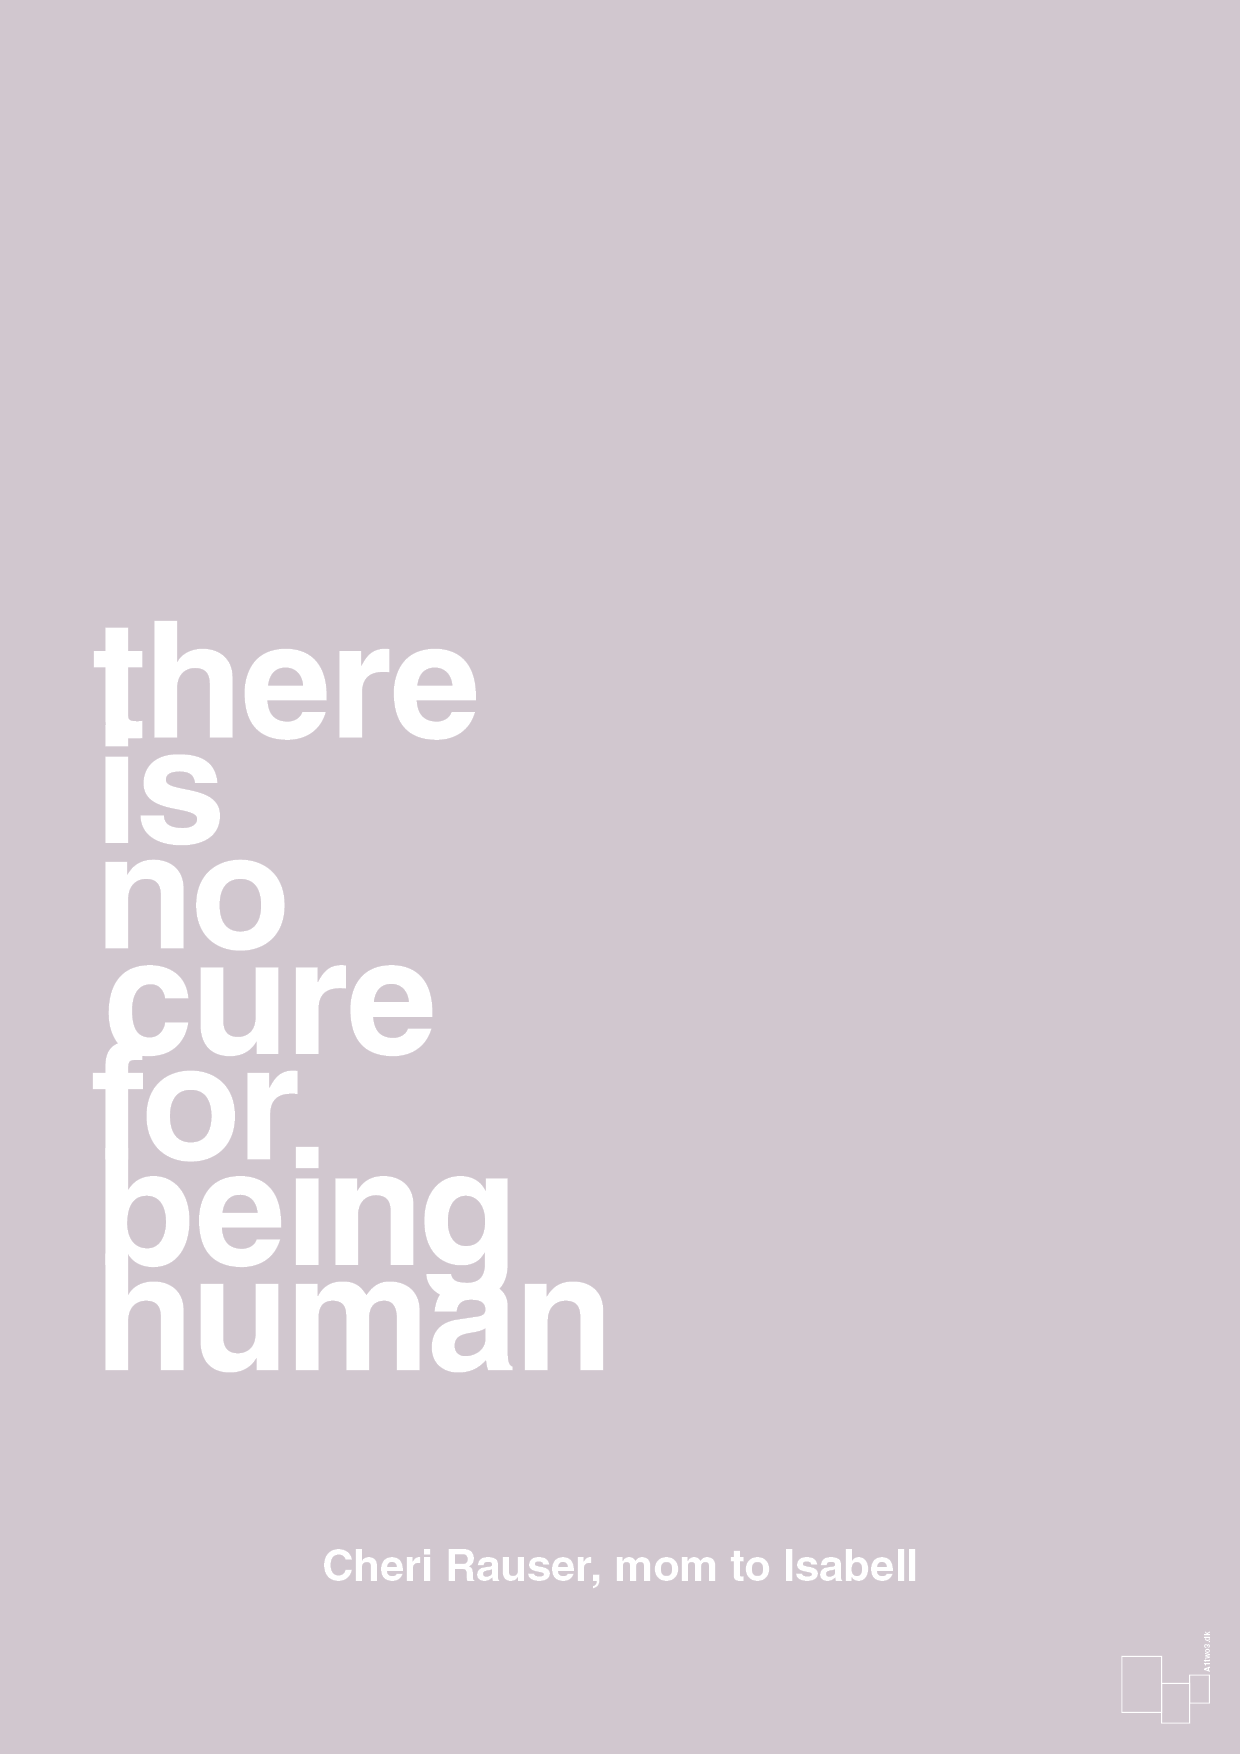 there is no cure for being human - Plakat med Samfund i Dusty Lilac